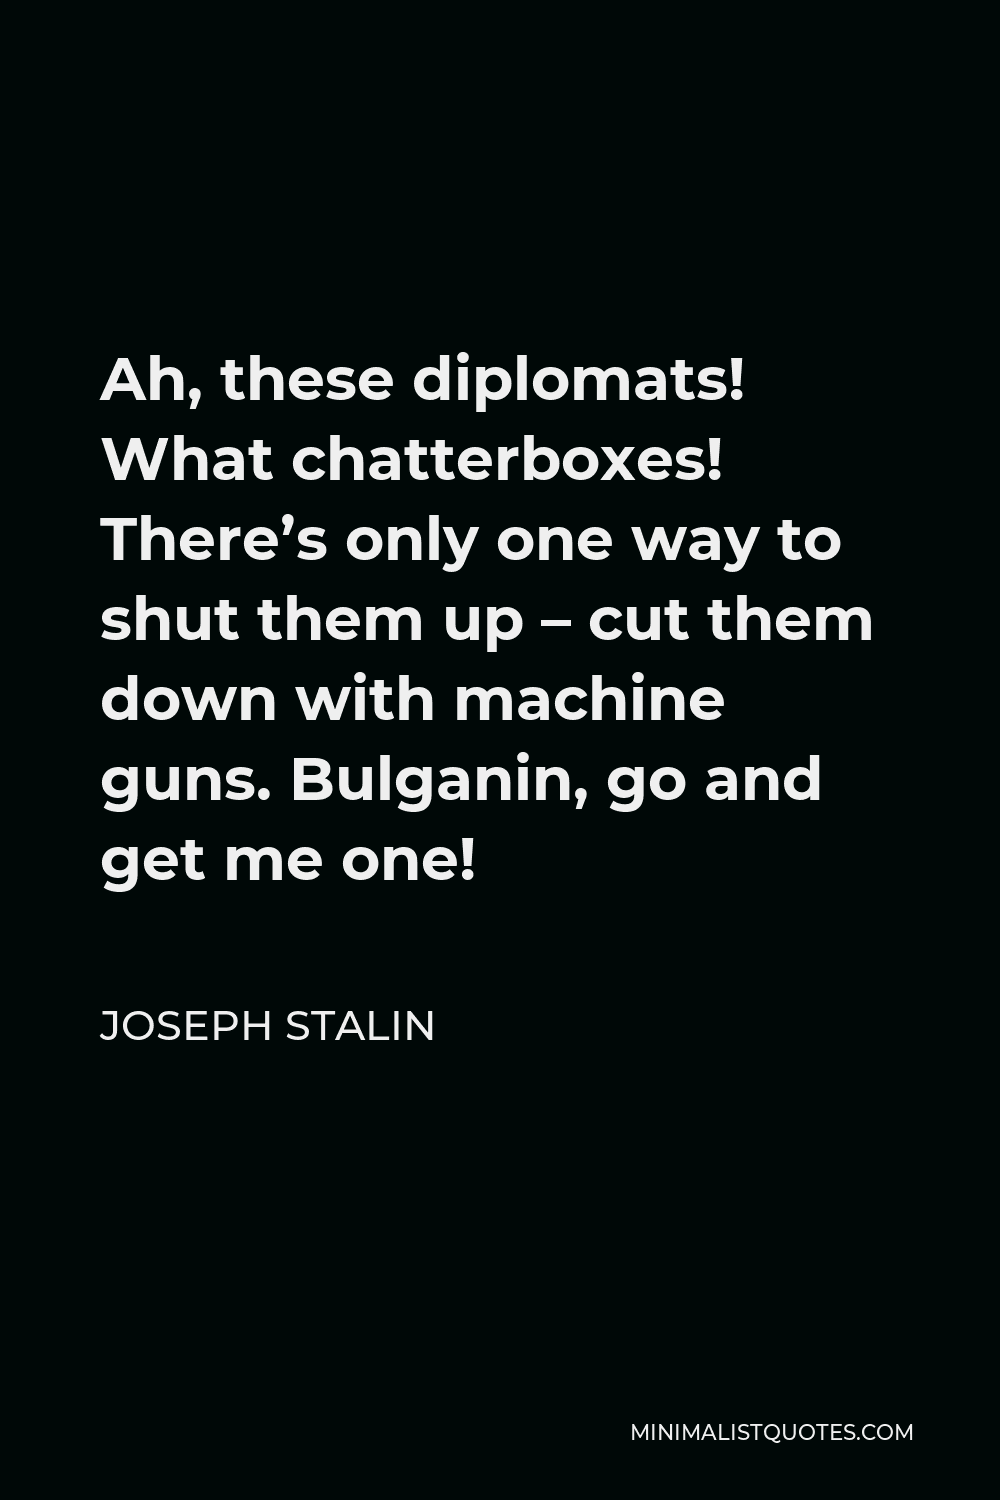 Joseph Stalin Quote - Ah, these diplomats! What chatterboxes! There’s only one way to shut them up – cut them down with machine guns. Bulganin, go and get me one!